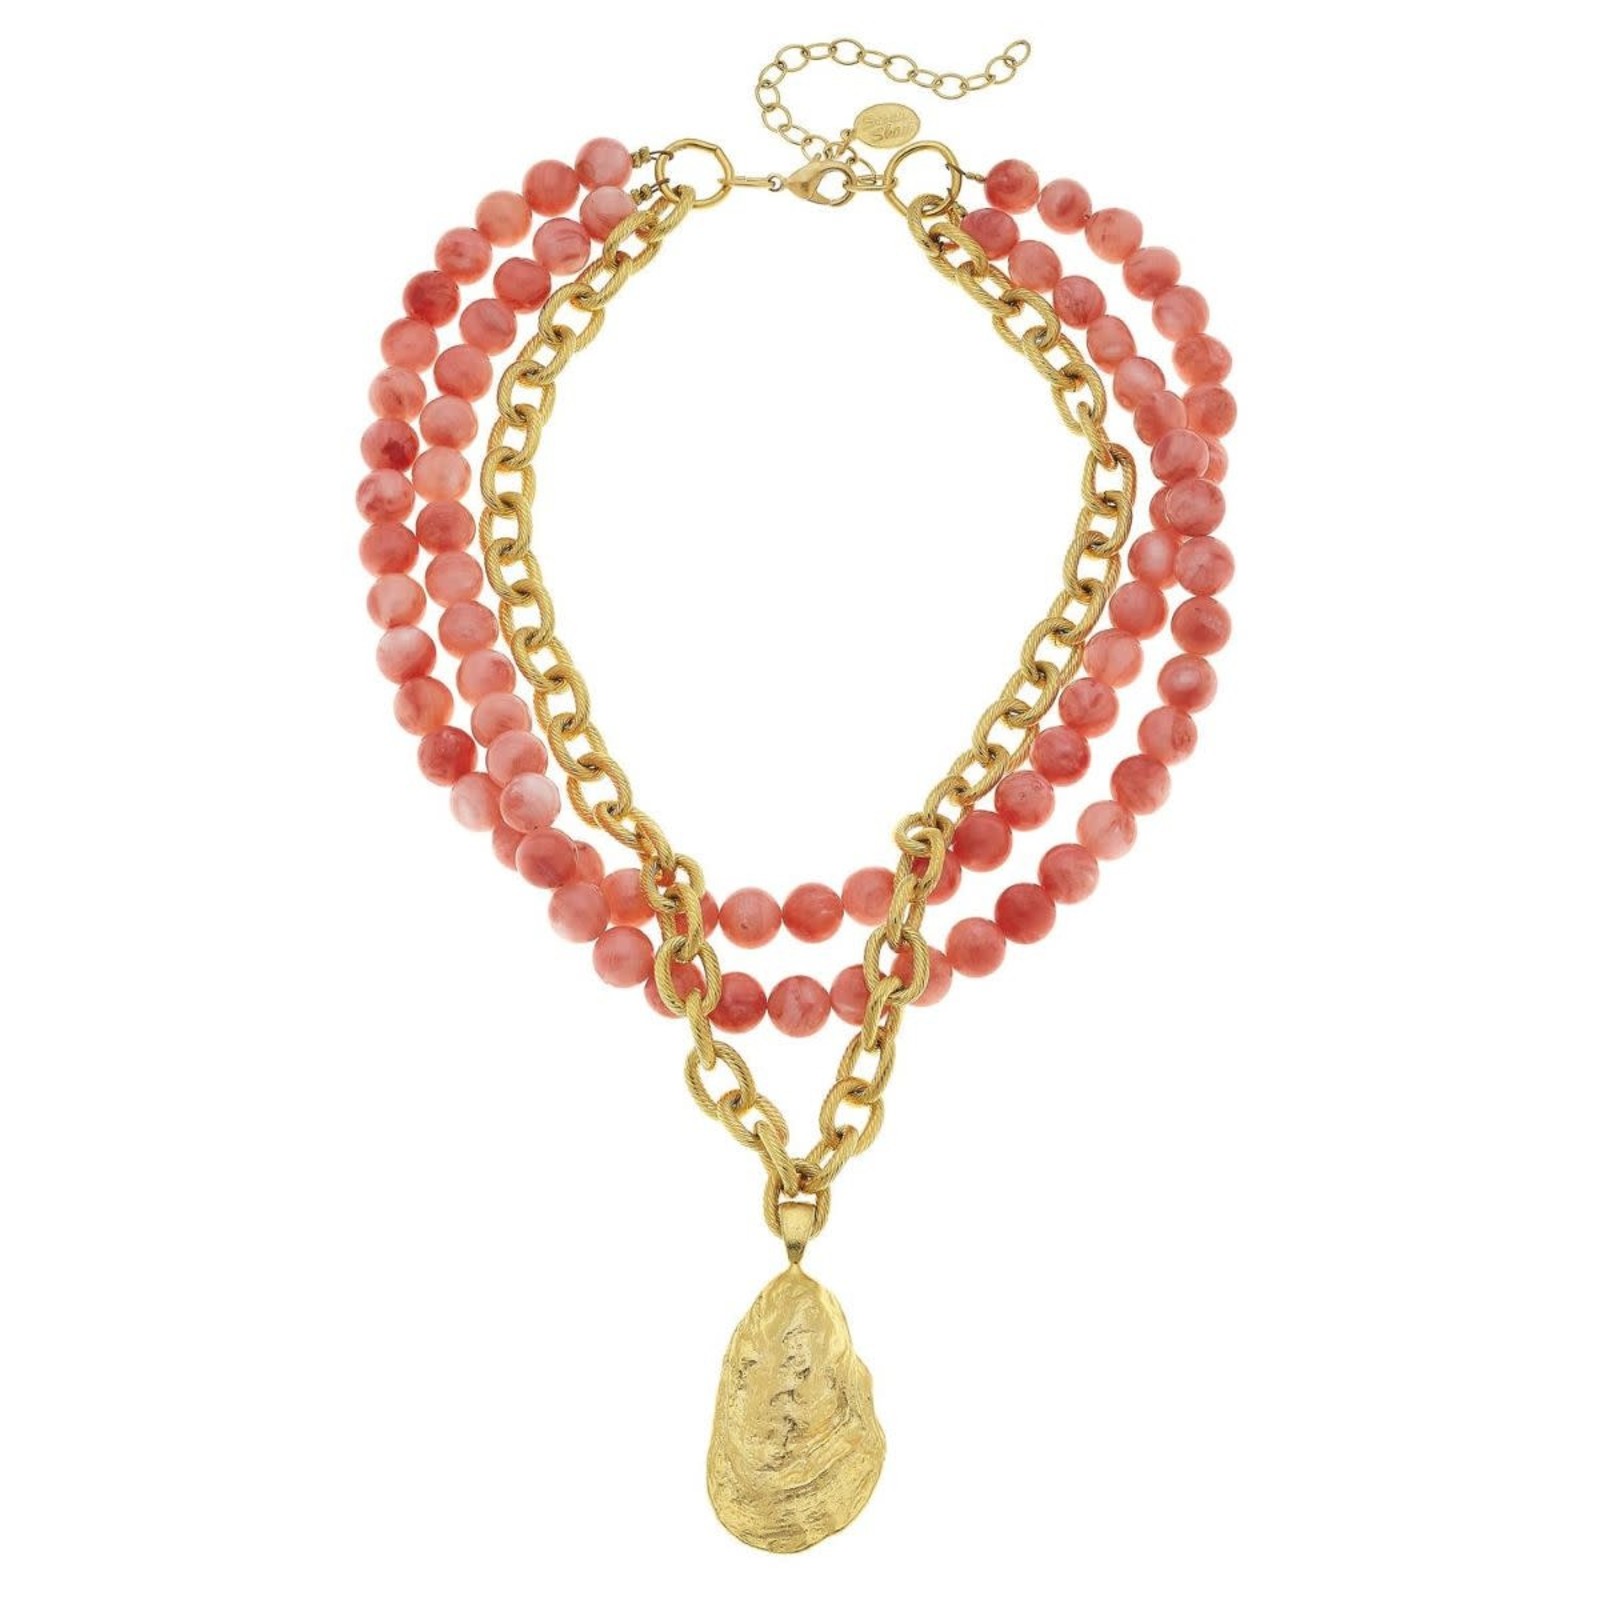 Susan Shaw Gold Oyster Shell and Pink Coral Necklace   3240o loading=